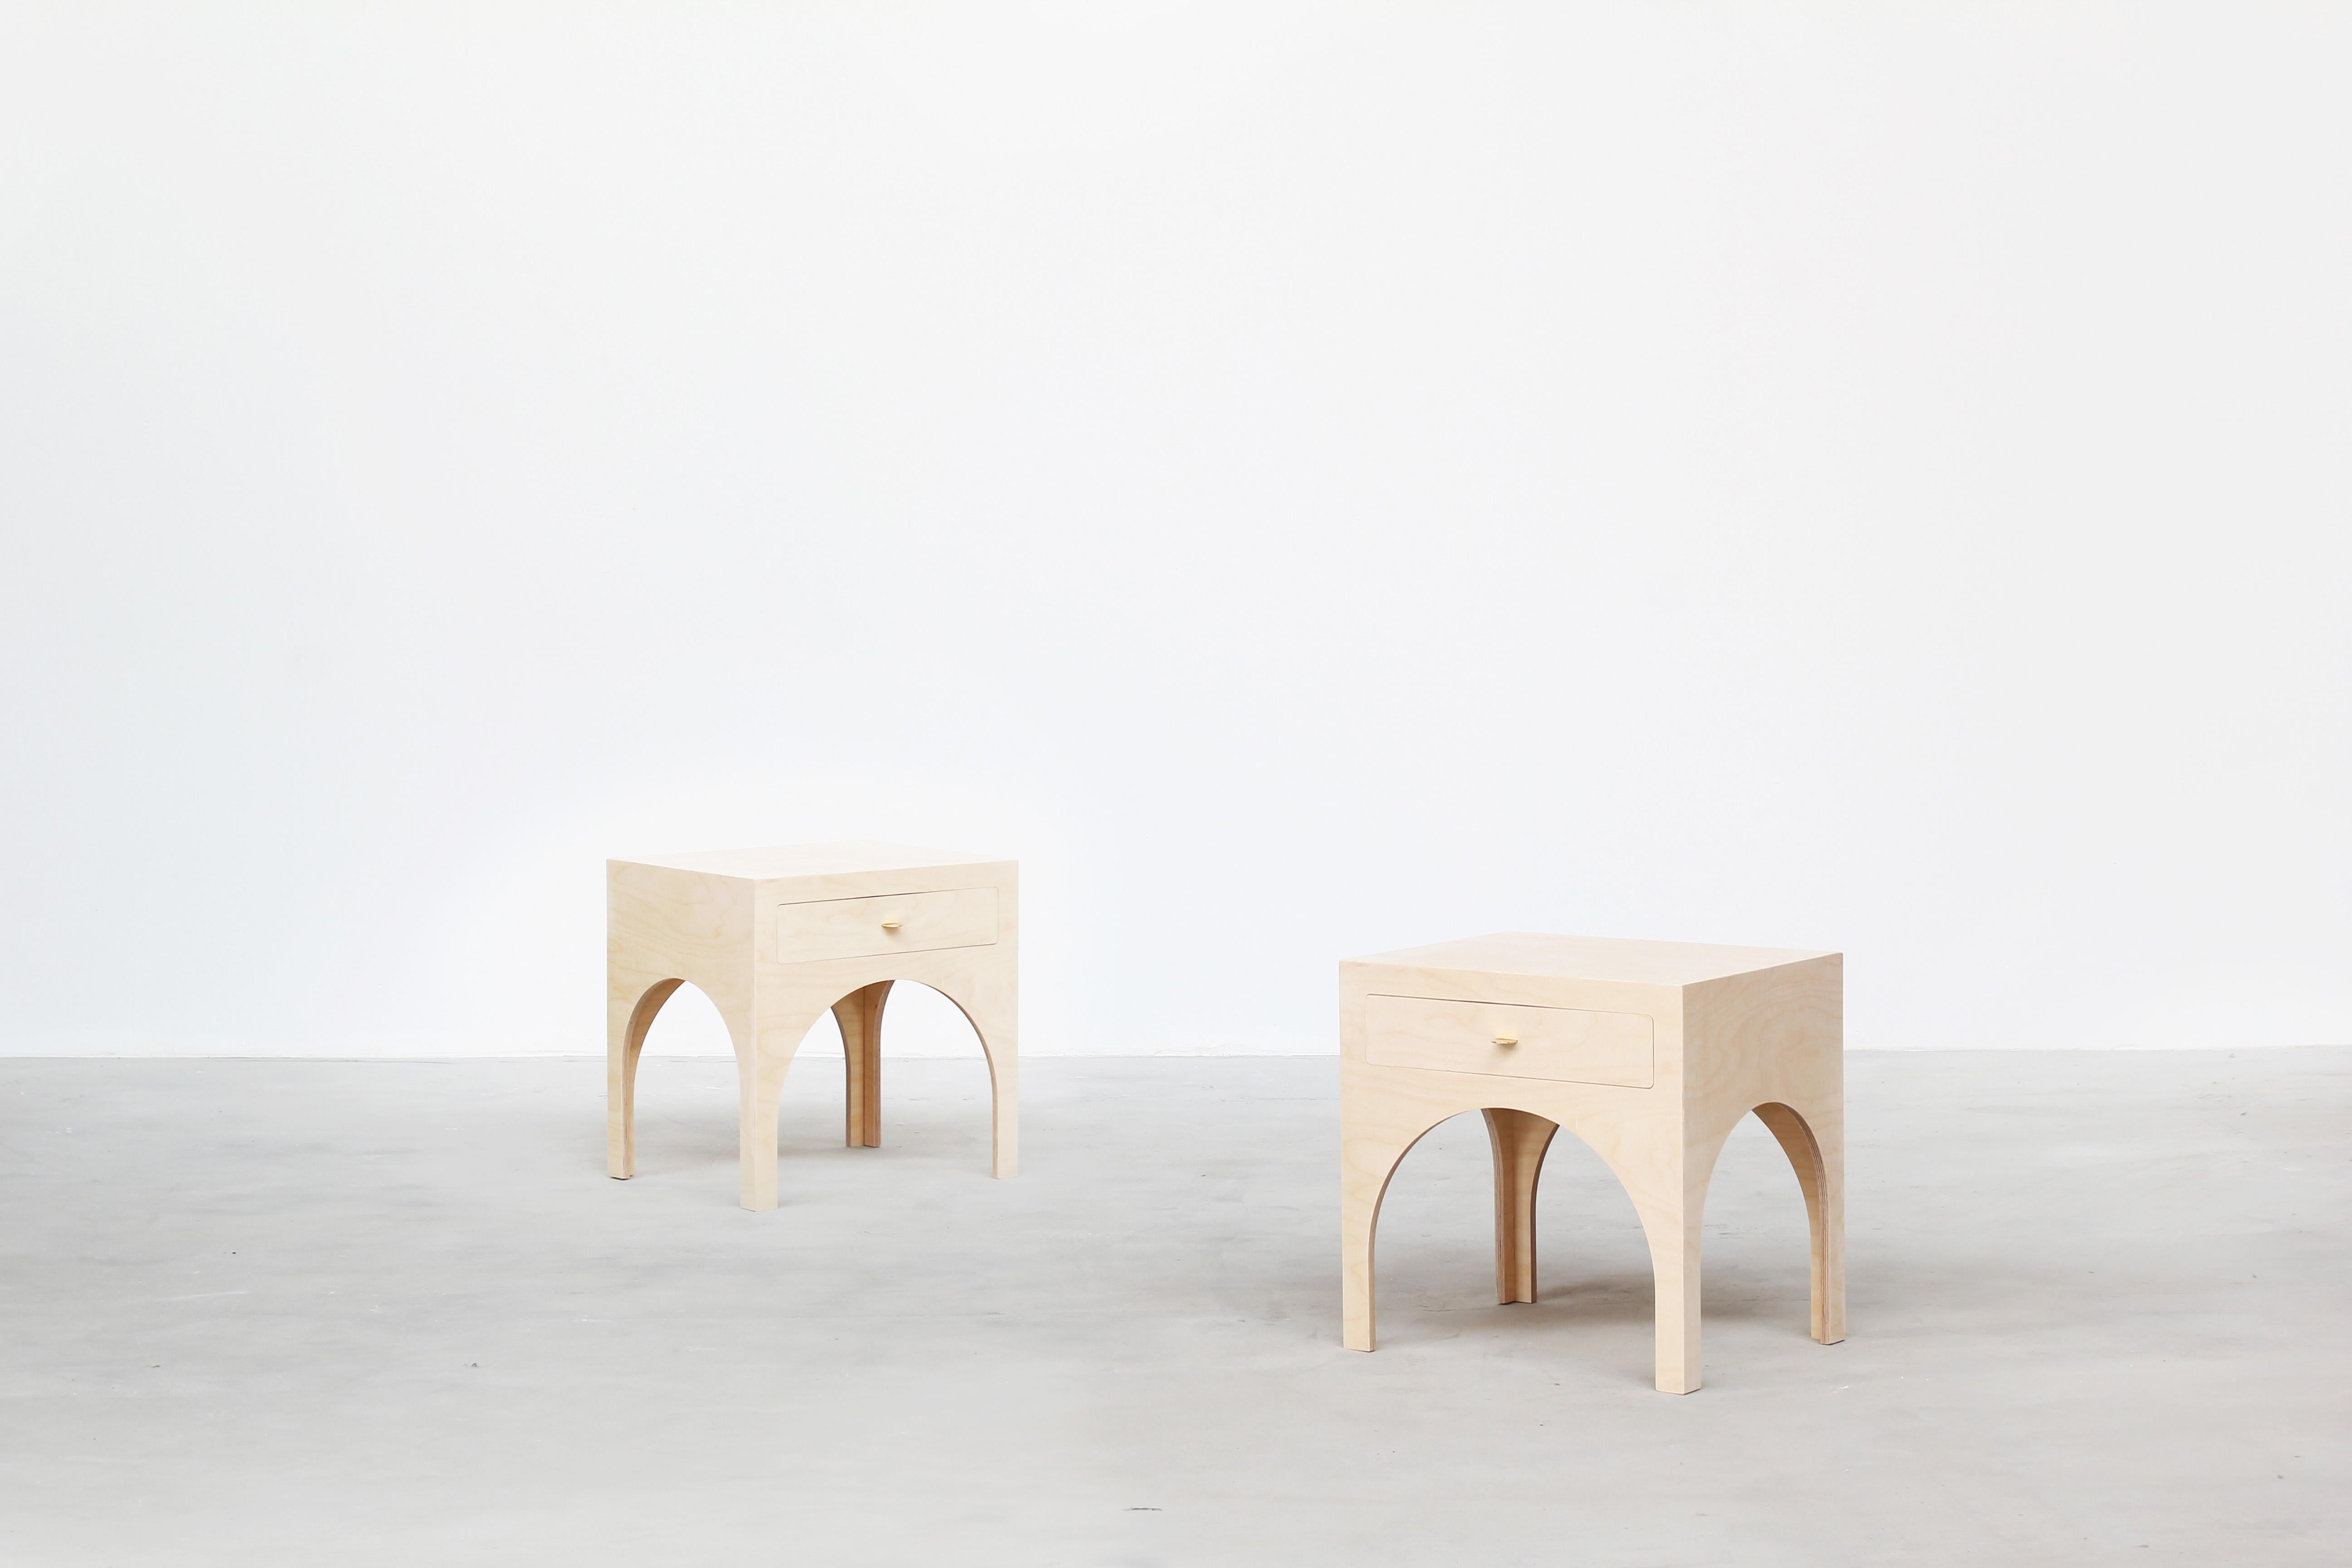 A beautiful pair of nightstands designed by Yuzo Bachmann for Atelier Bachmann, handcrafted in Germany 2019. 
These nightstands are made out of plywood and brass handles. Finished with natural furniture wax.

Available made to order within 2